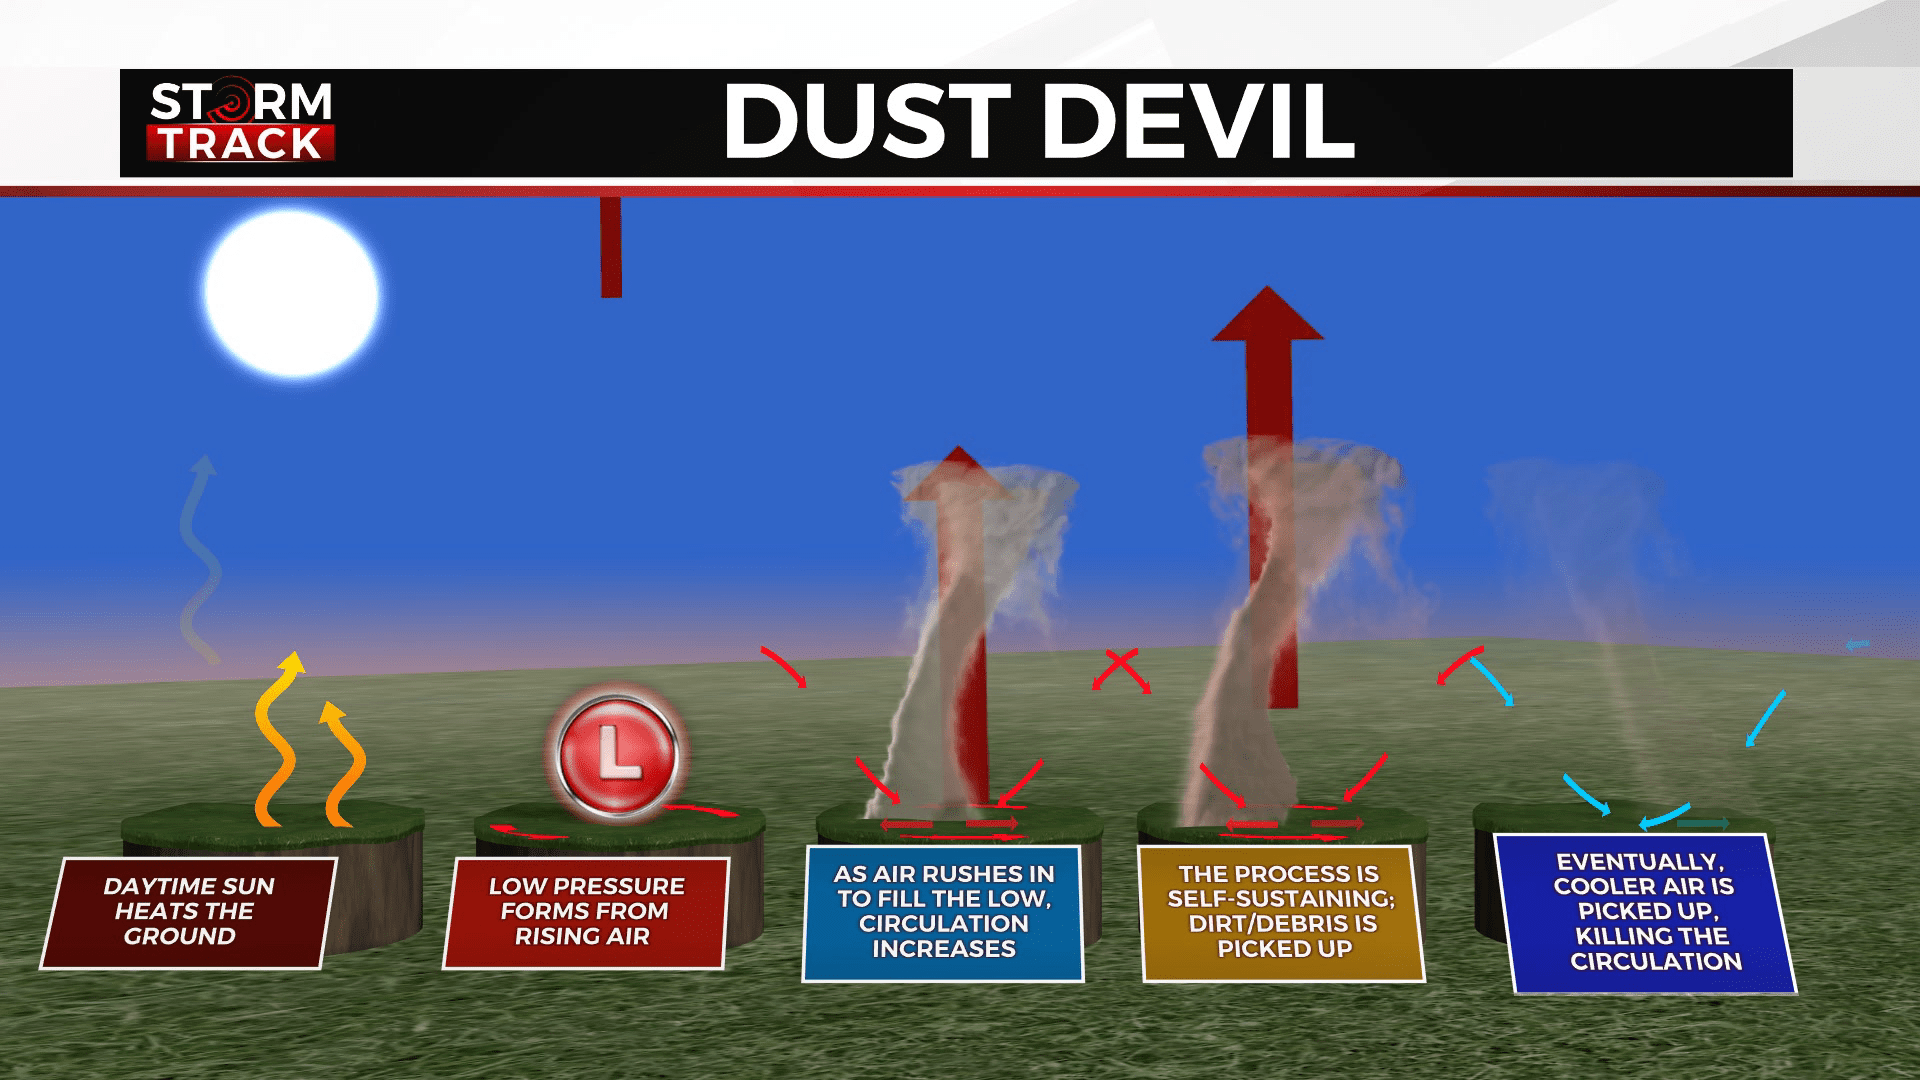 Graphic showing how a dust devil forms